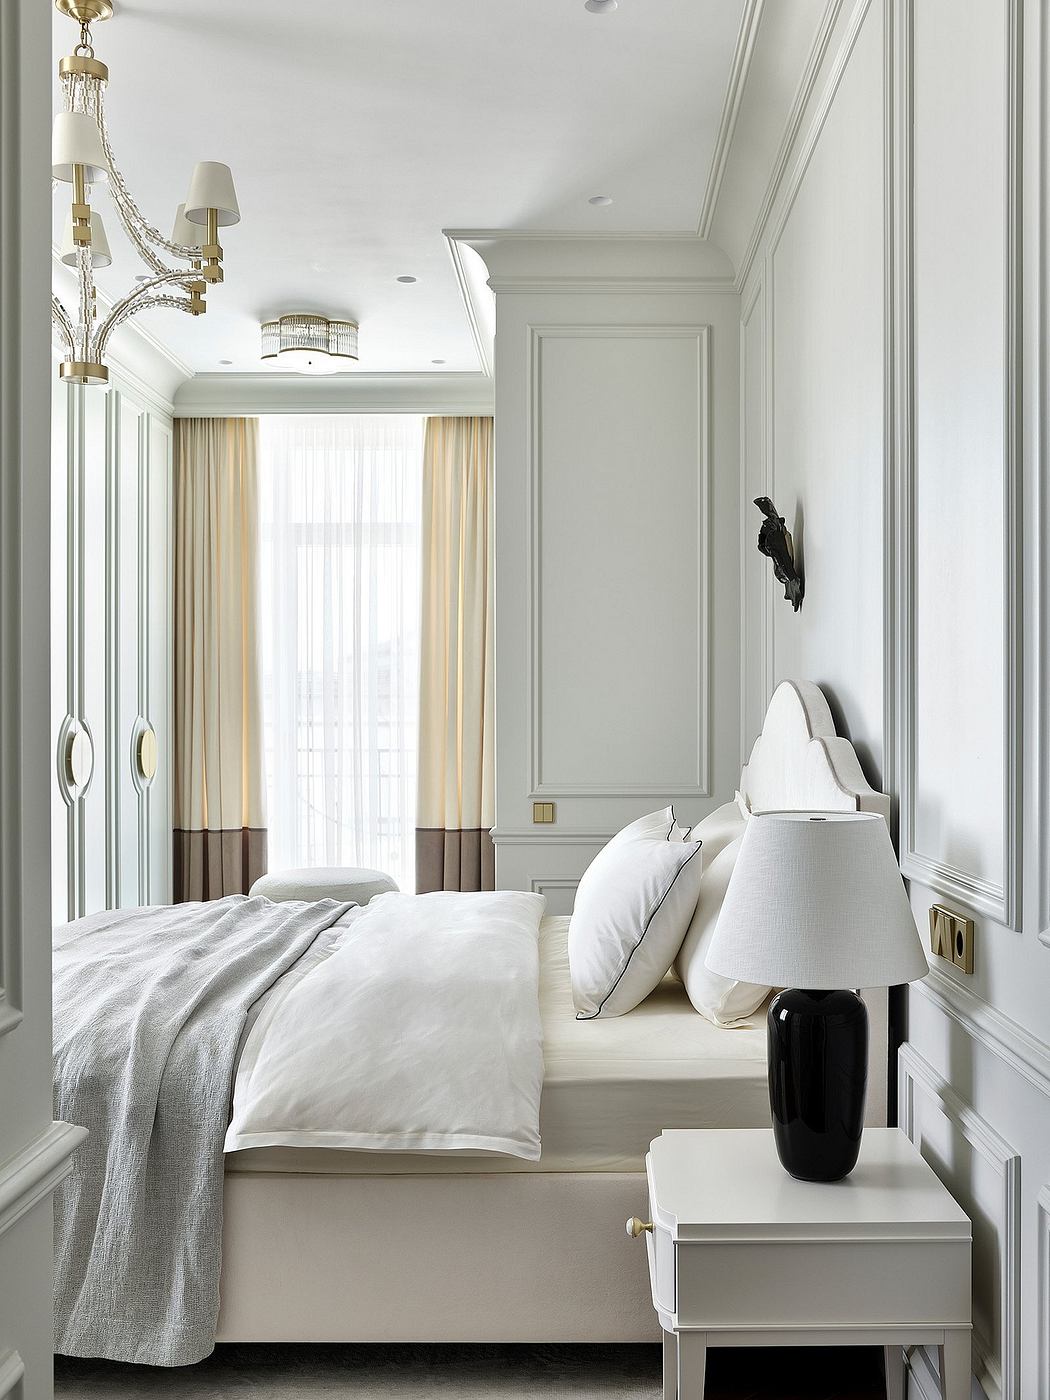 Elegant bedroom with crown molding, built-in cabinetry, and luxurious bedding.